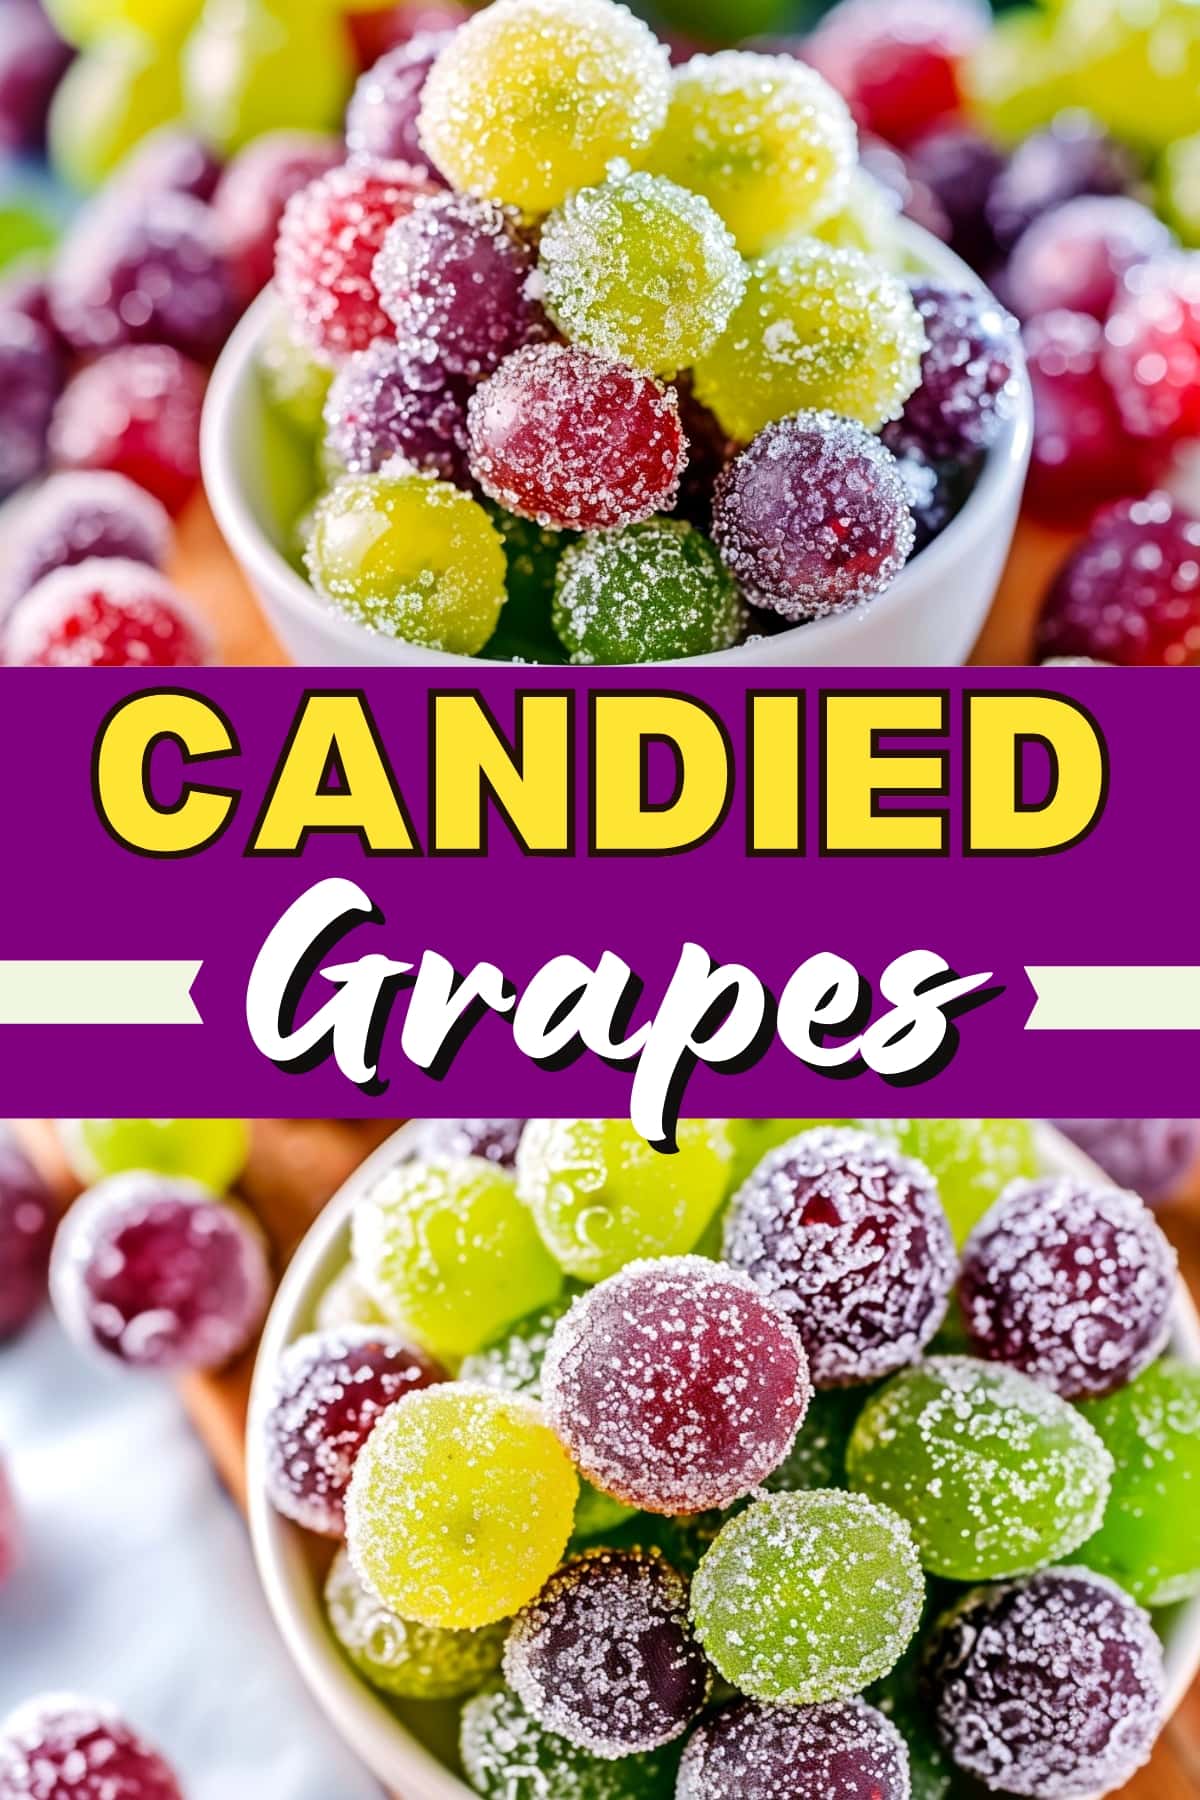 Candied Grapes (Viral TikTok Recipe) - Insanely Good